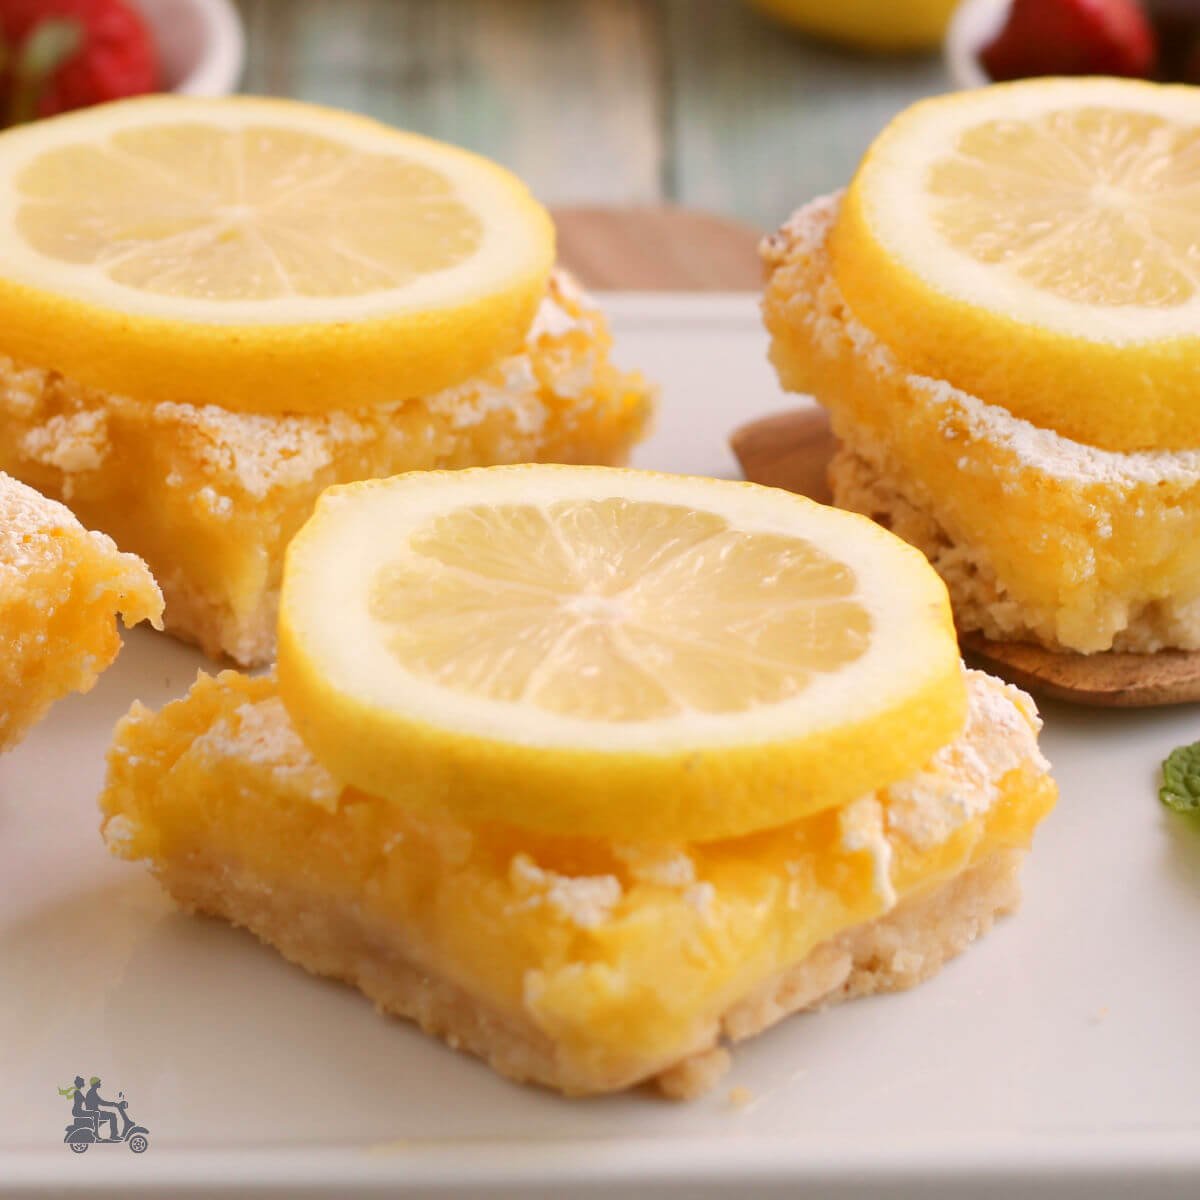 Lemon Squares sprinkled with confectioners sugar and topped with lemon slice.